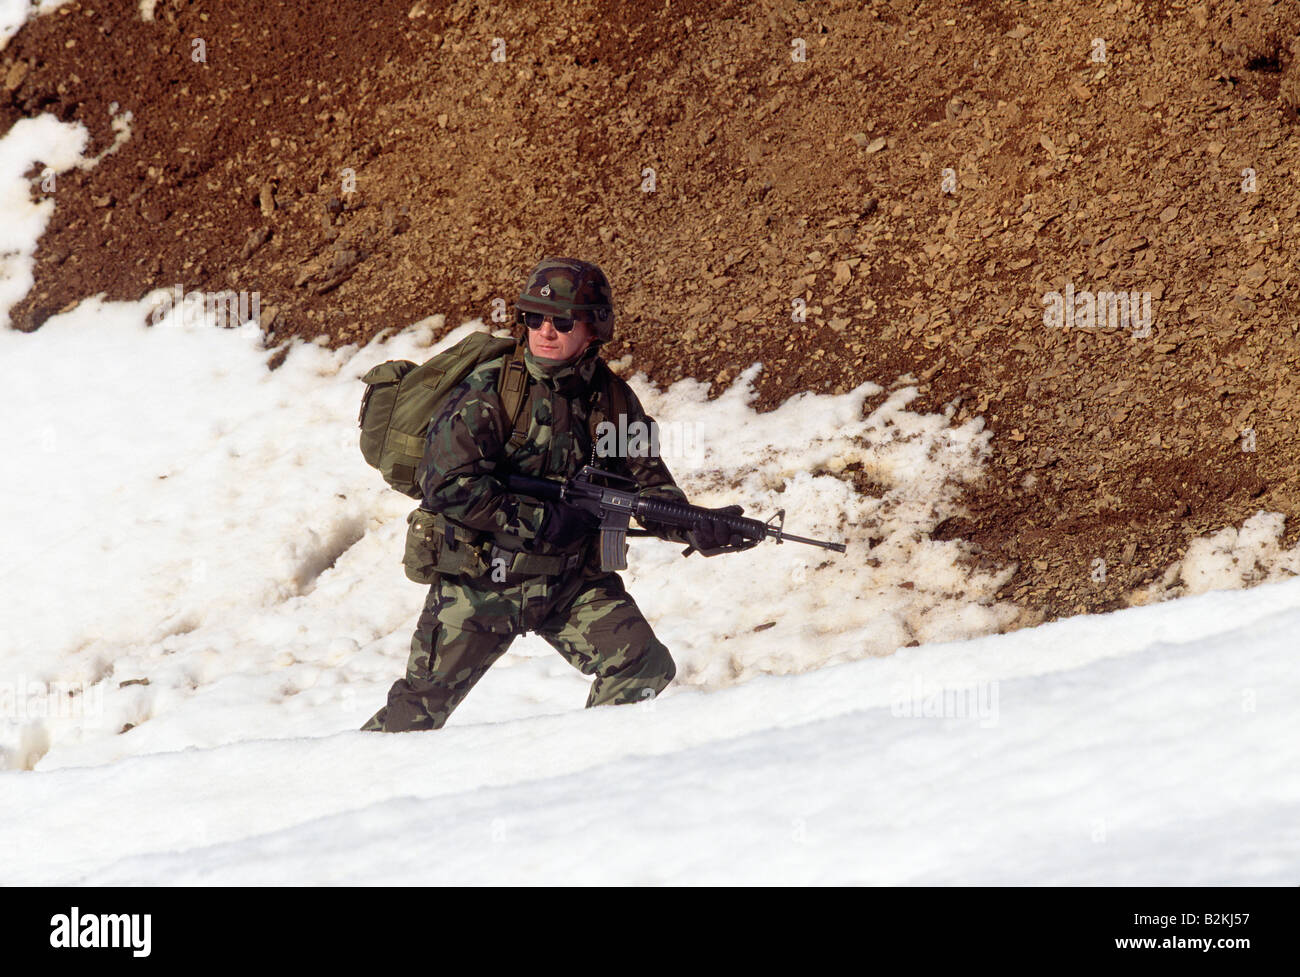 US Army soldier sulle manovre in campo Foto Stock